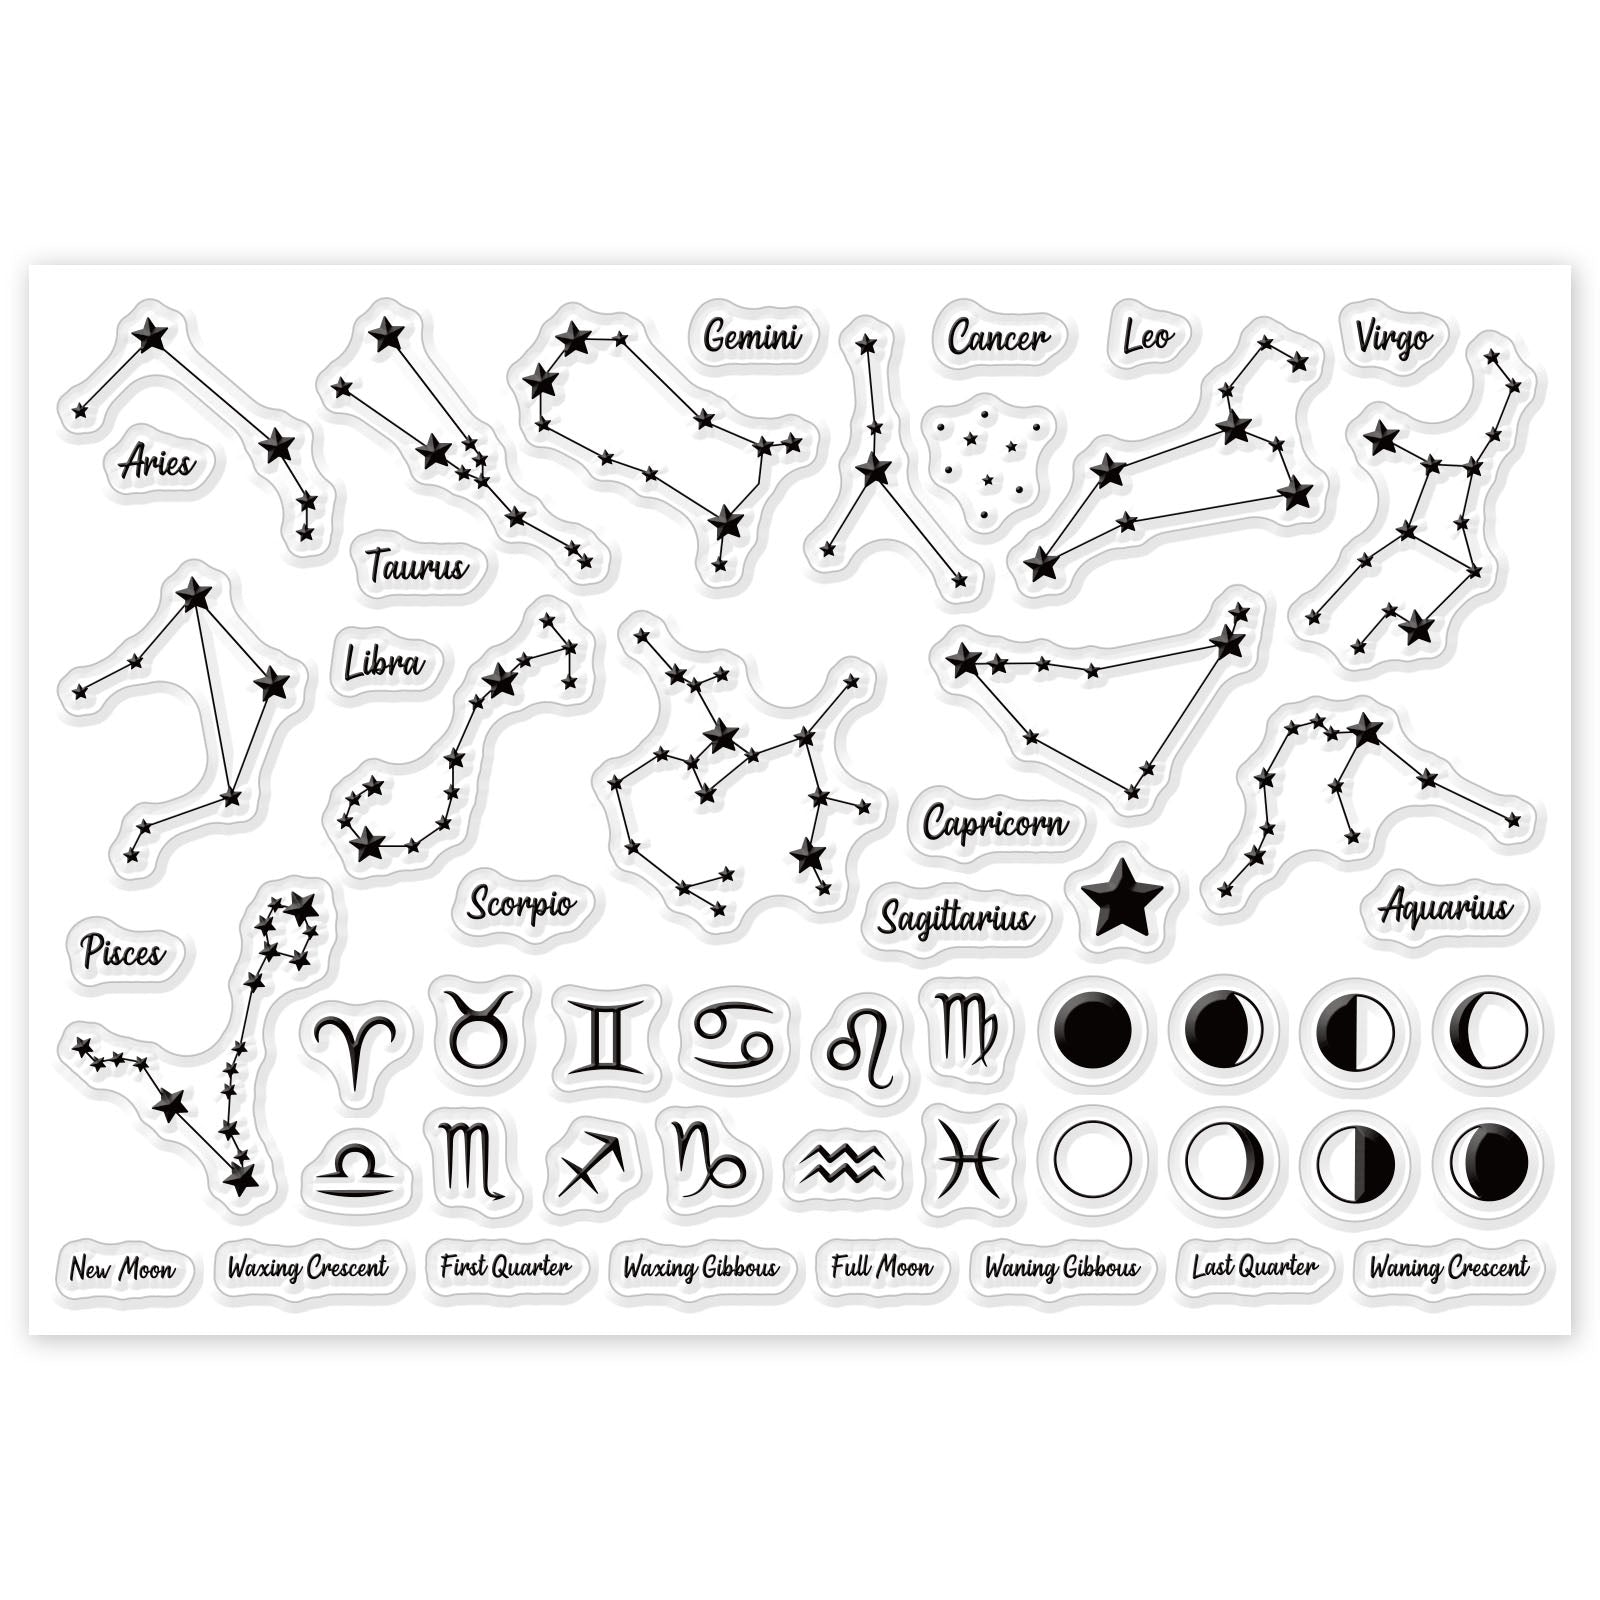 Globleland 12 Constellations, Phases of the Moon Clear Silicone Stamp Seal for Card Making Decoration and DIY Scrapbooking